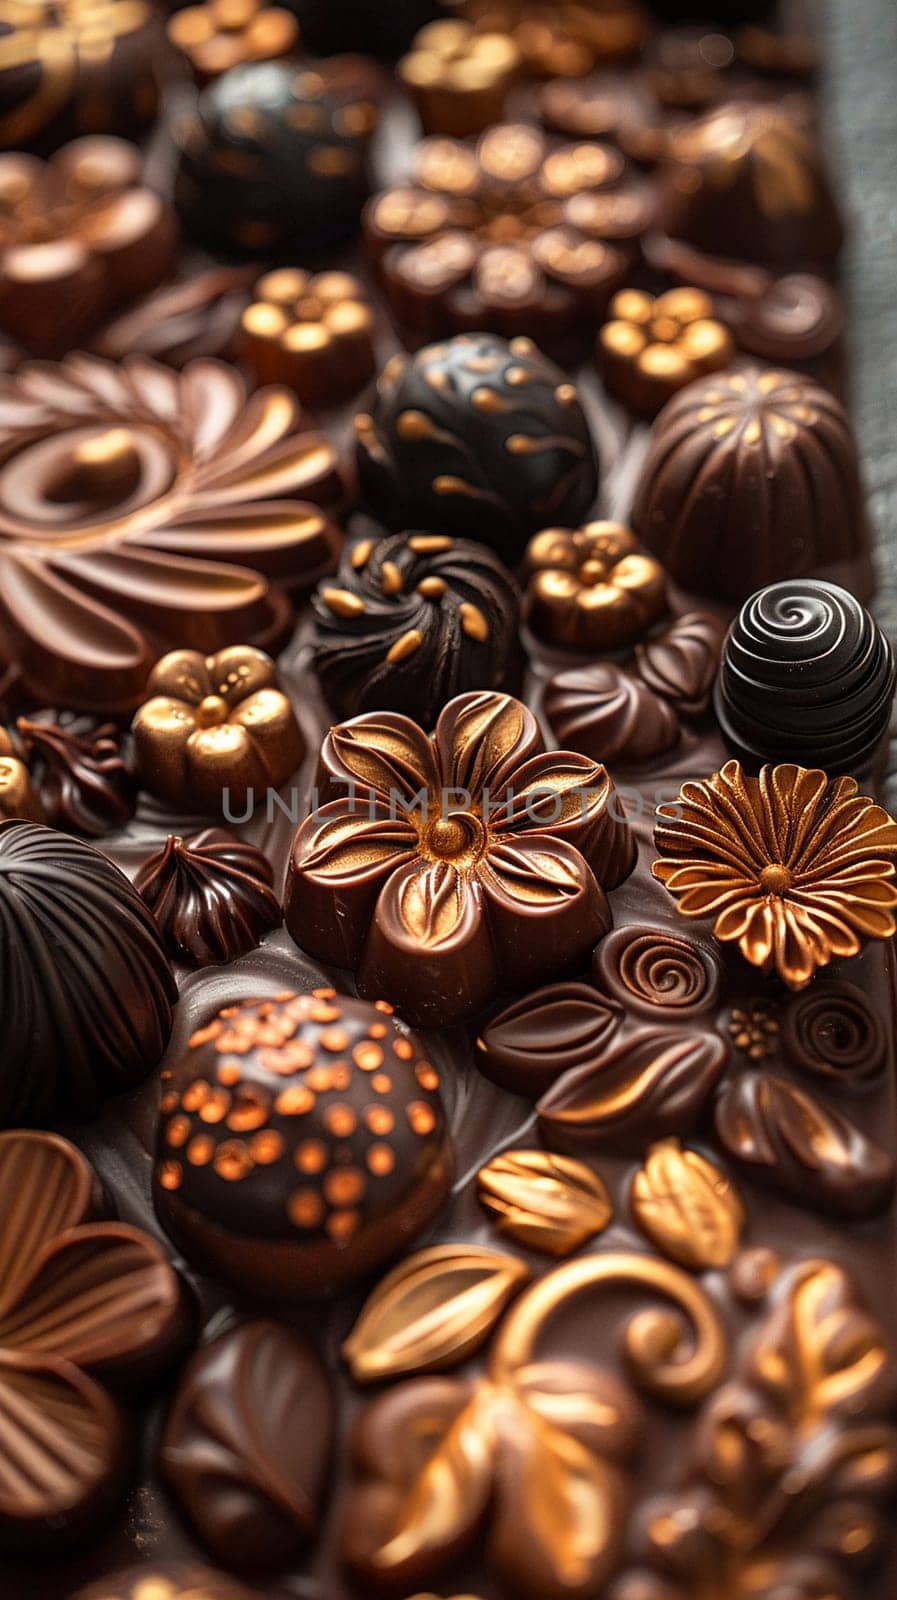 Chocolatier Studio Designs Decadent Masterpieces in Business of Sweet Arts, Chocolate palettes and truffle designs design a narrative of decadent masterpieces and sweet arts in the chocolatier studio business.